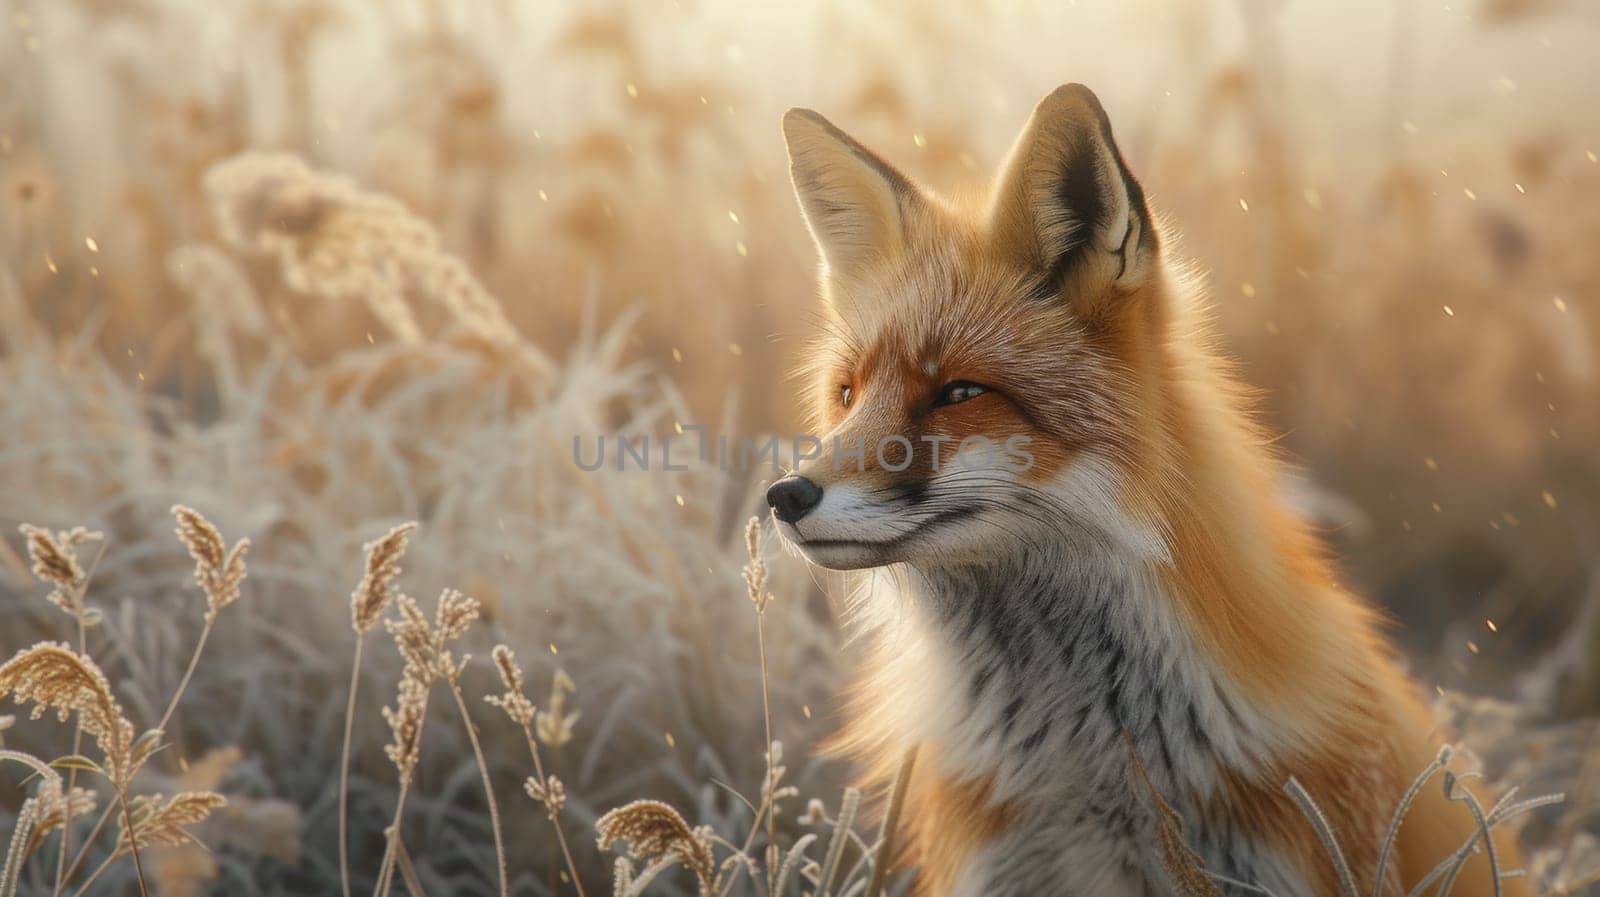 A close up of a fox in the grass with some flowers